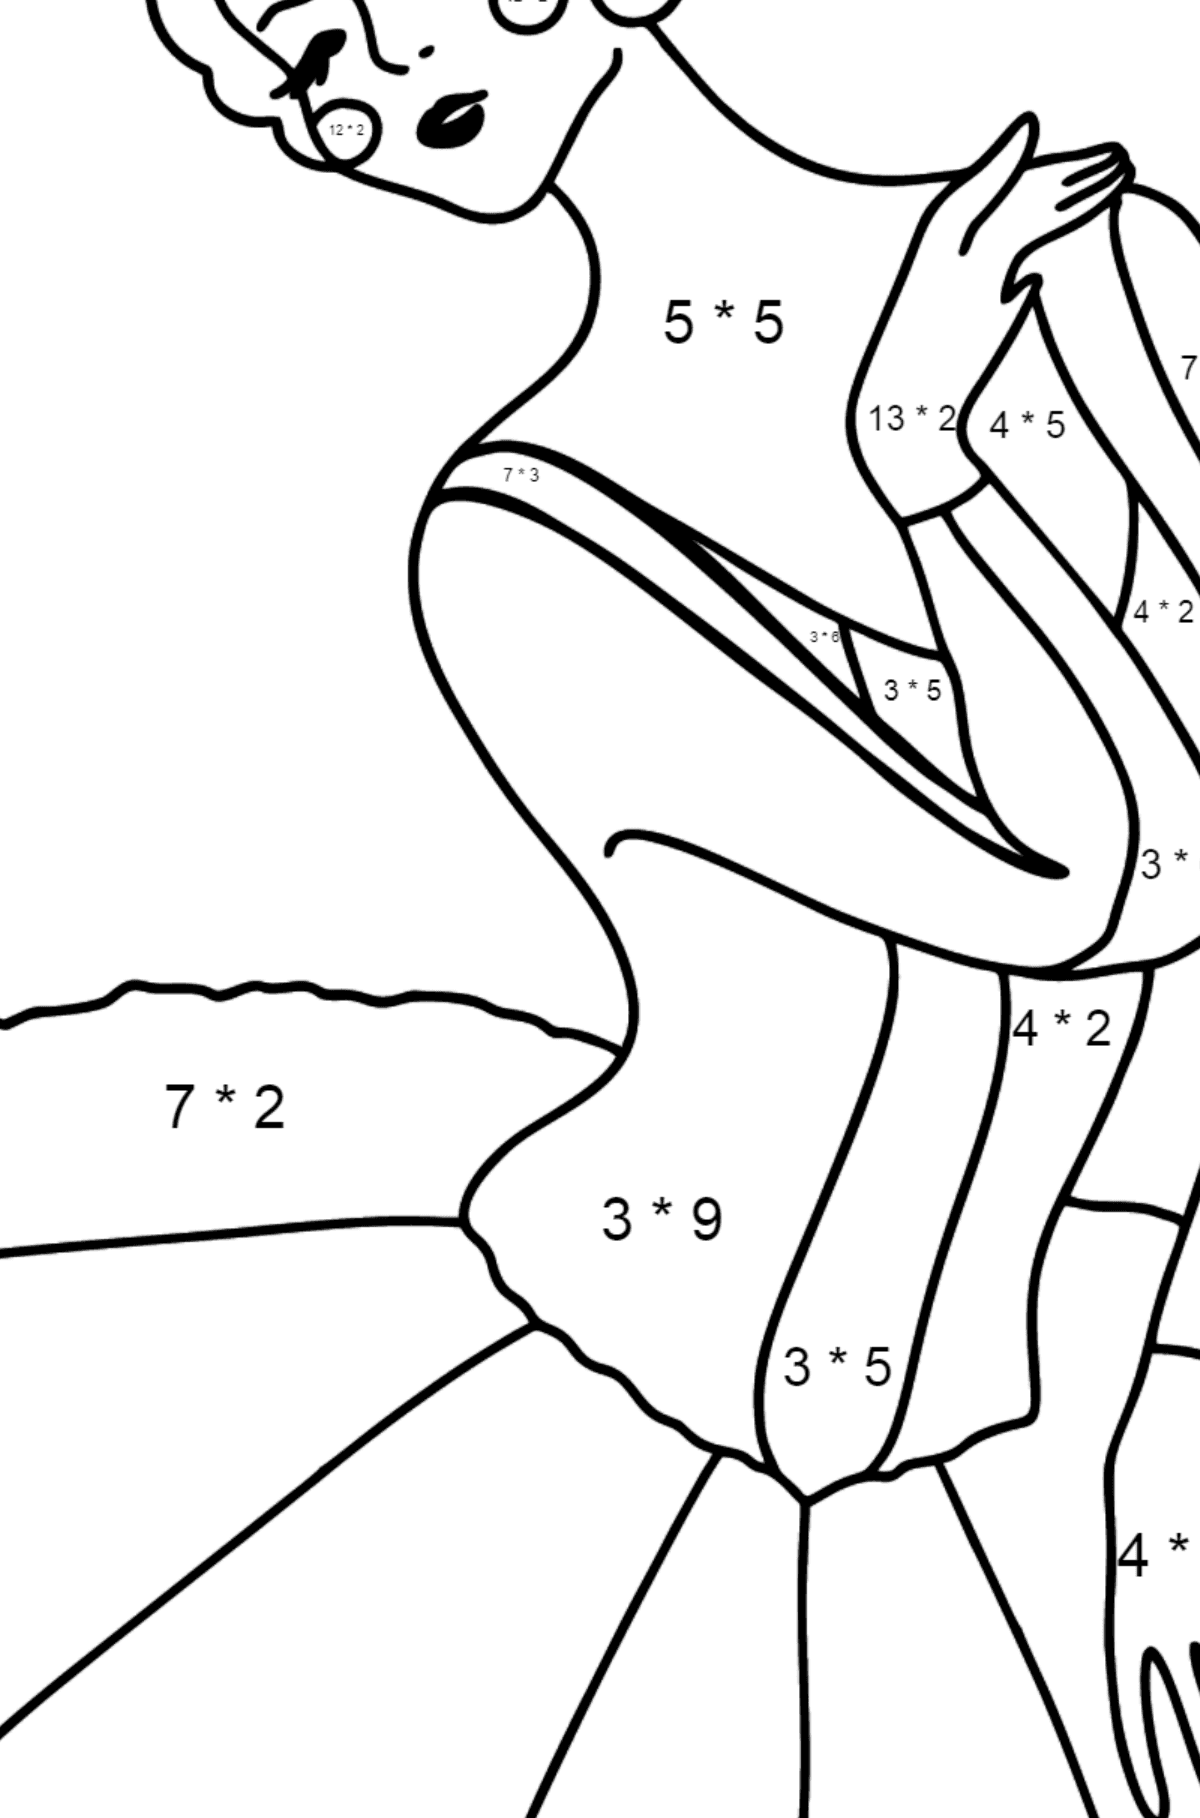 Ballerina in Tutu Skirt coloring page - Math Coloring - Multiplication for Kids